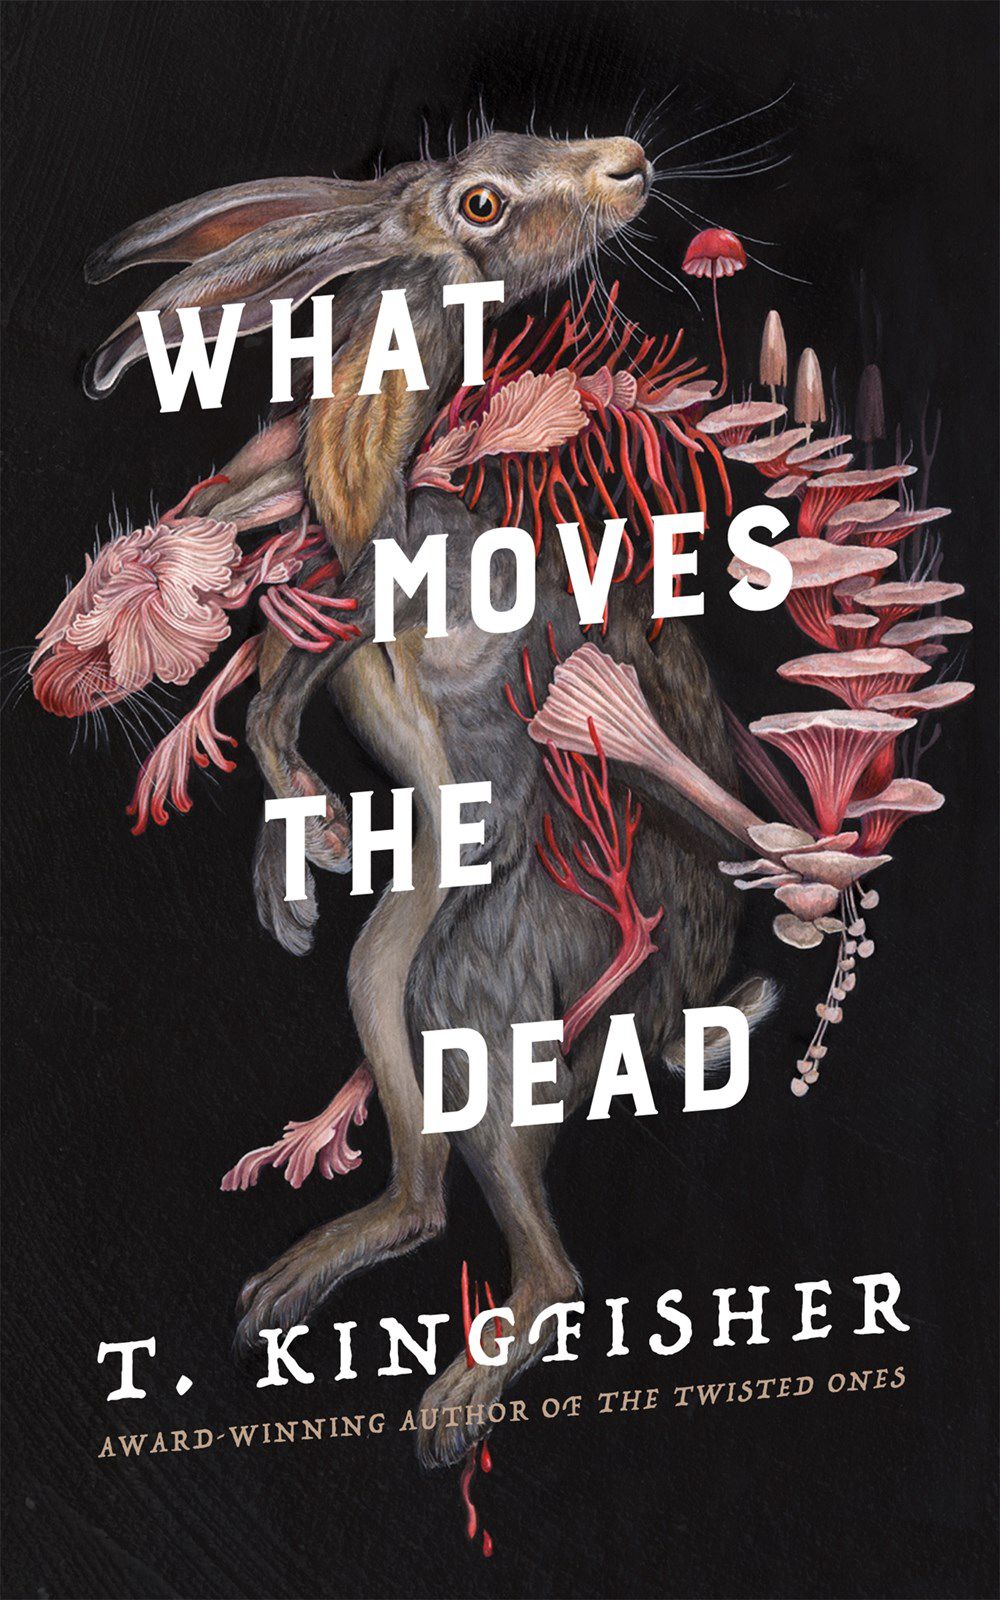 The cover of the book What Moves the Dead by T. Kingfisher, a surreal portrait of a rabbit dotted with a rabbit skeleton made of mushrooms.